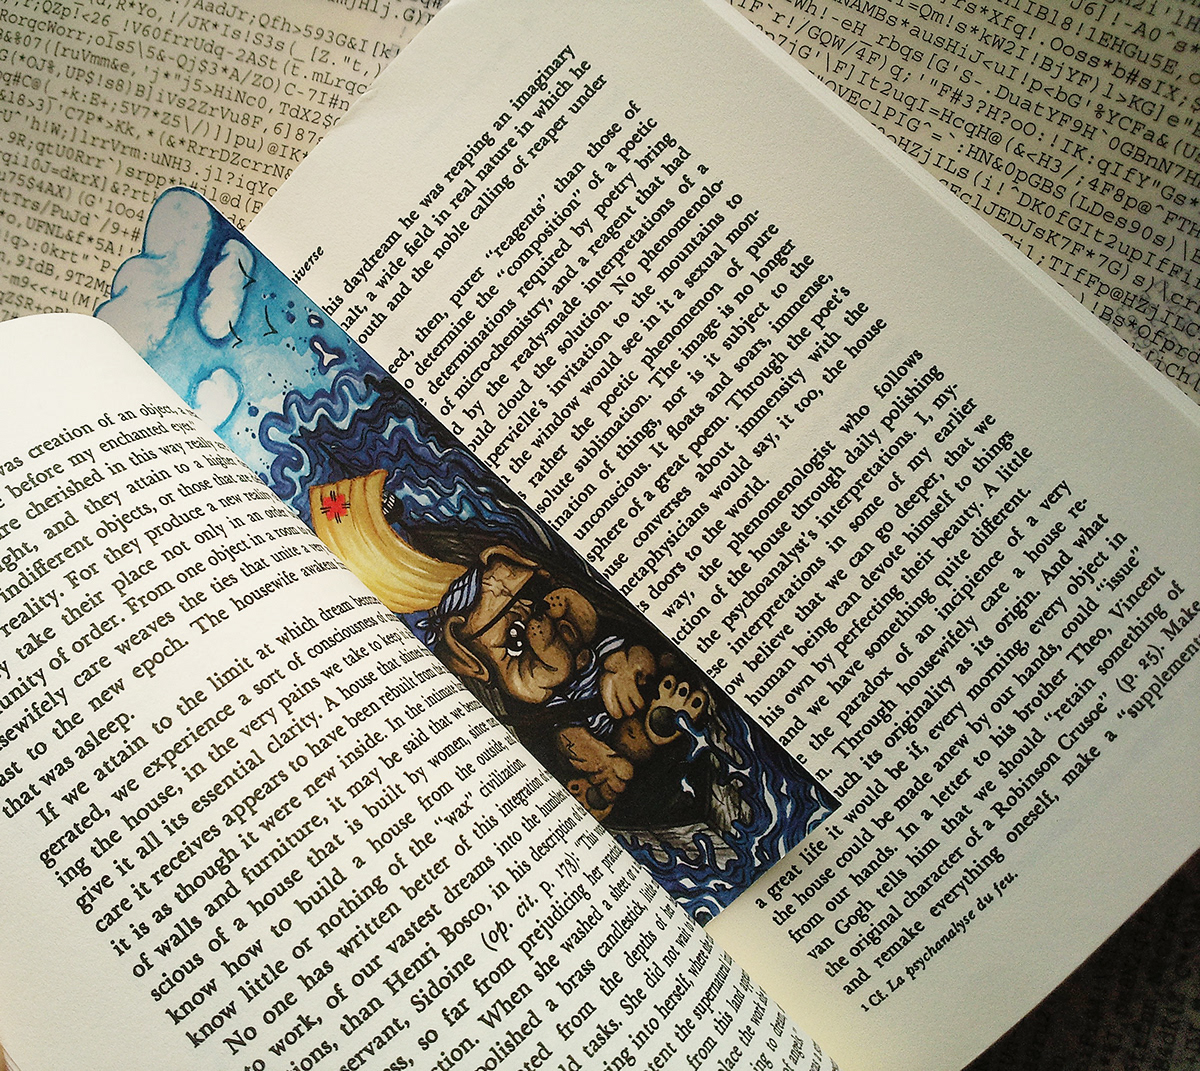 bookmark dog children book puppies puppy painter pirate strawberry Nature water forest clouds creative watercolor